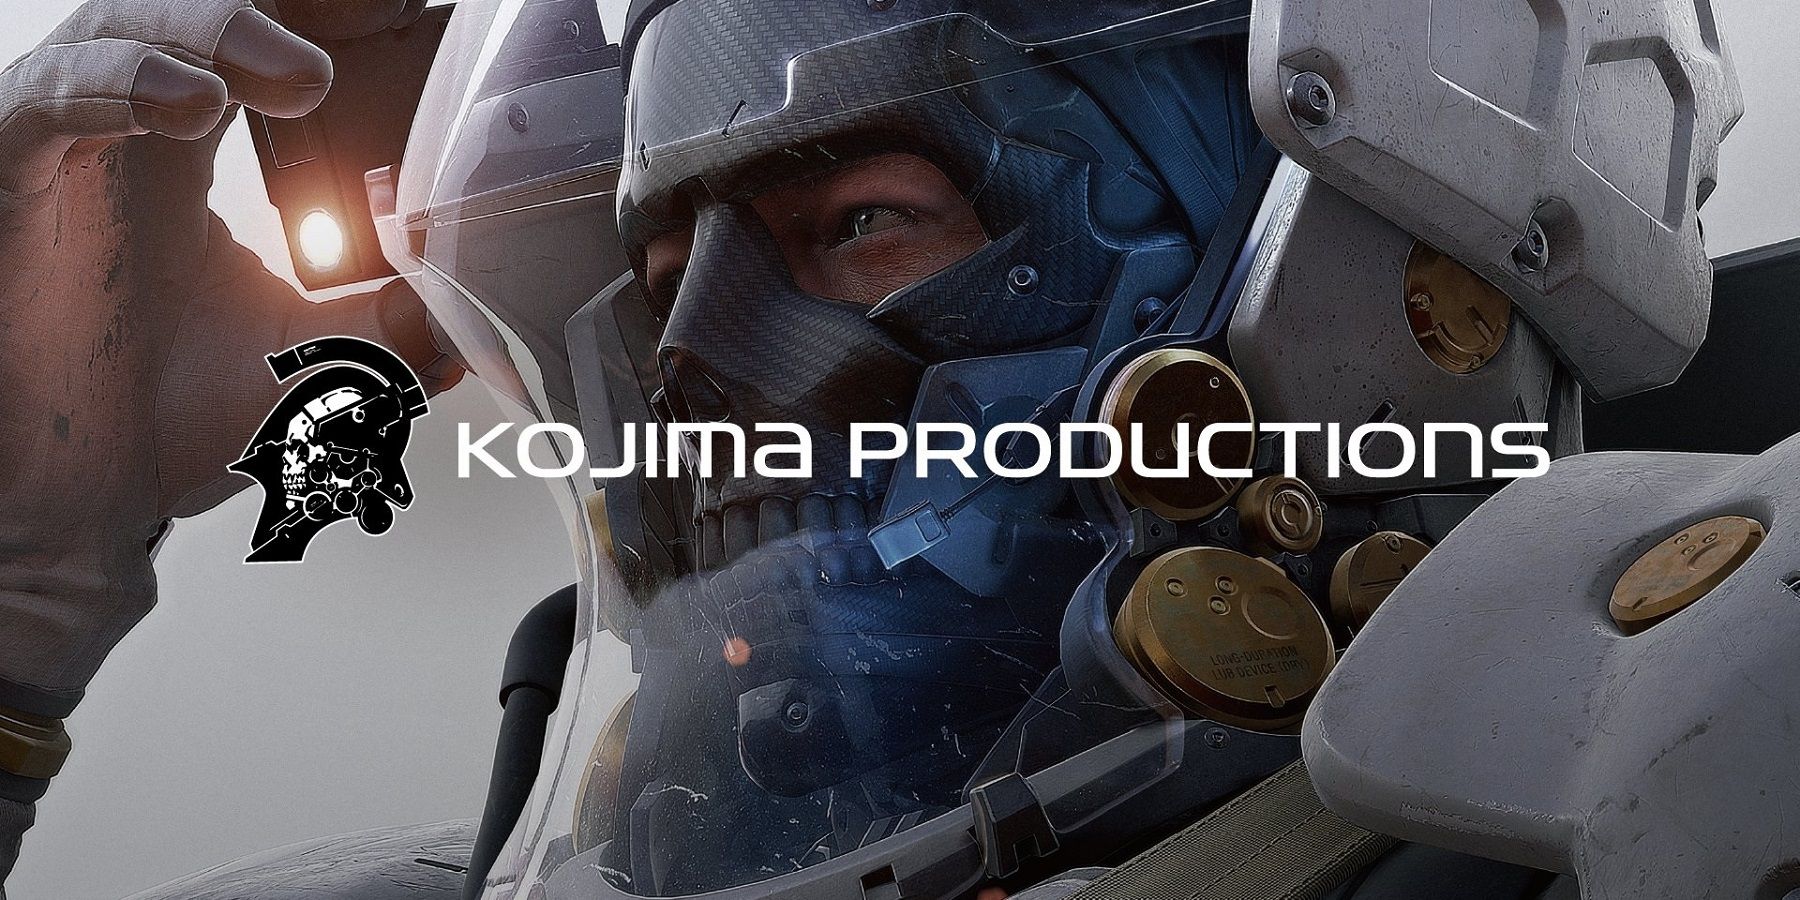 Hideo Kojima Teases New Project on Twitter - Siliconera